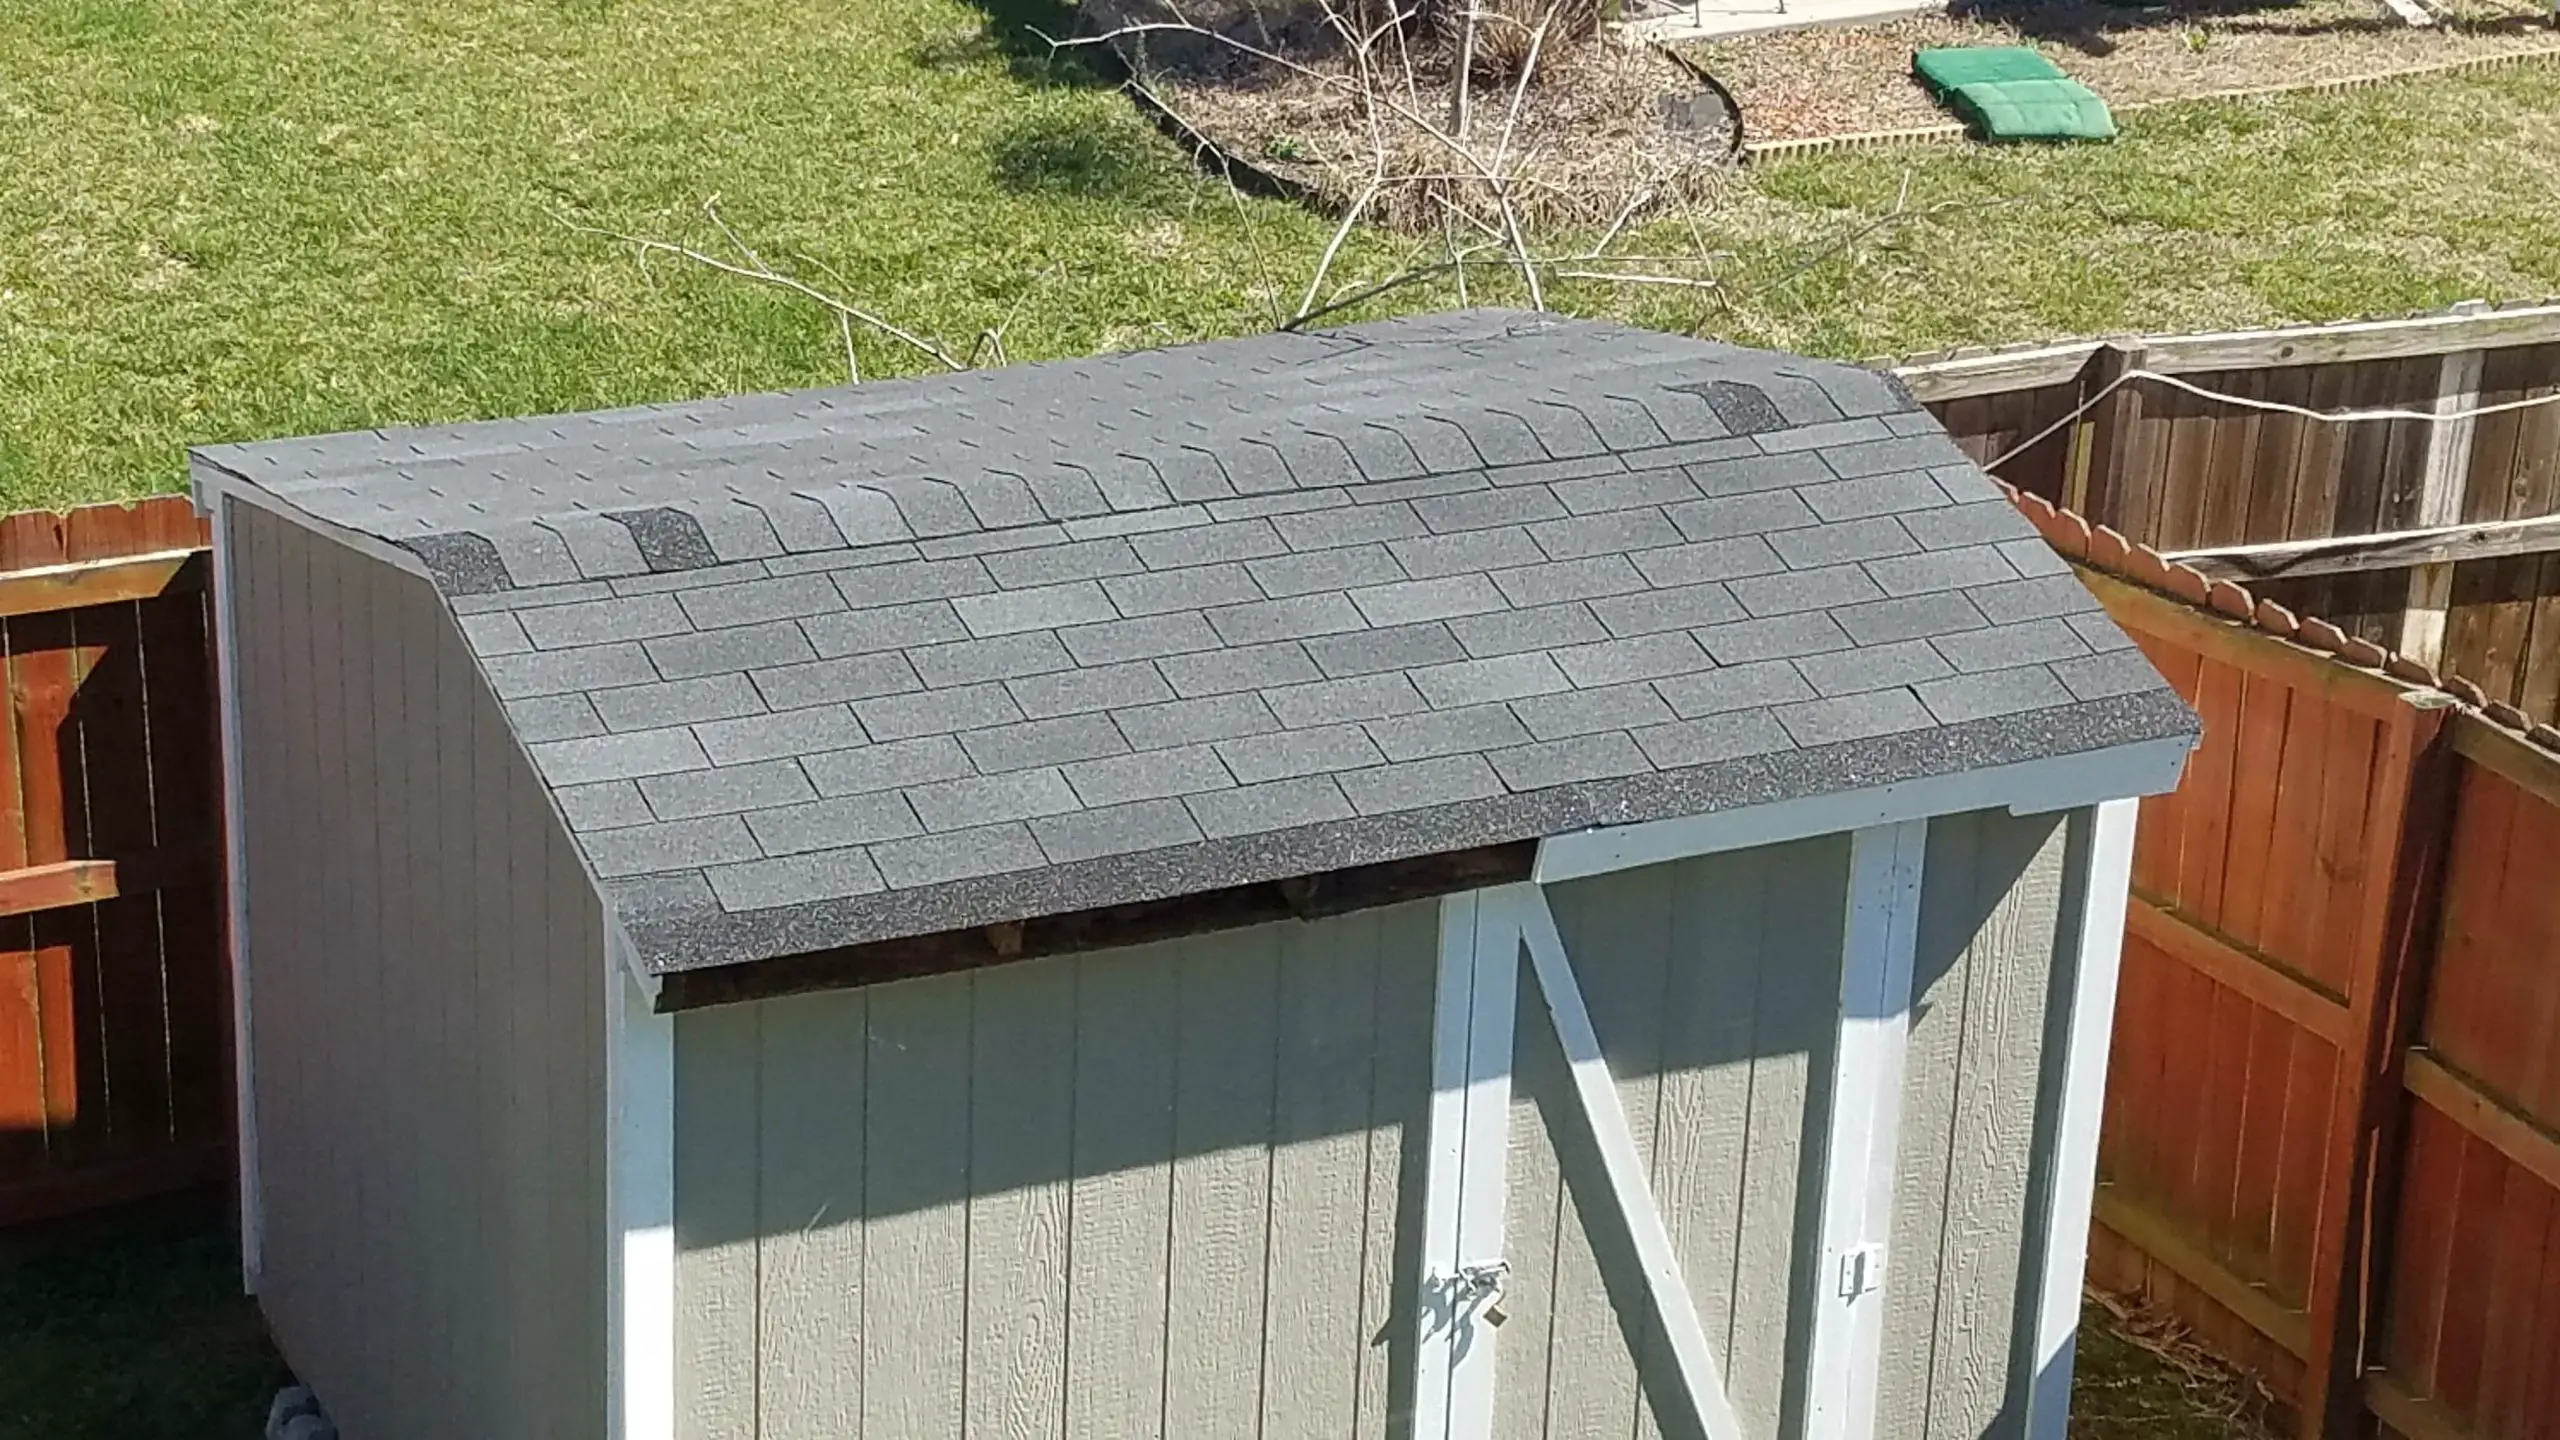 Replace a row of shingles on a shed, or do I have to replace the entire ...